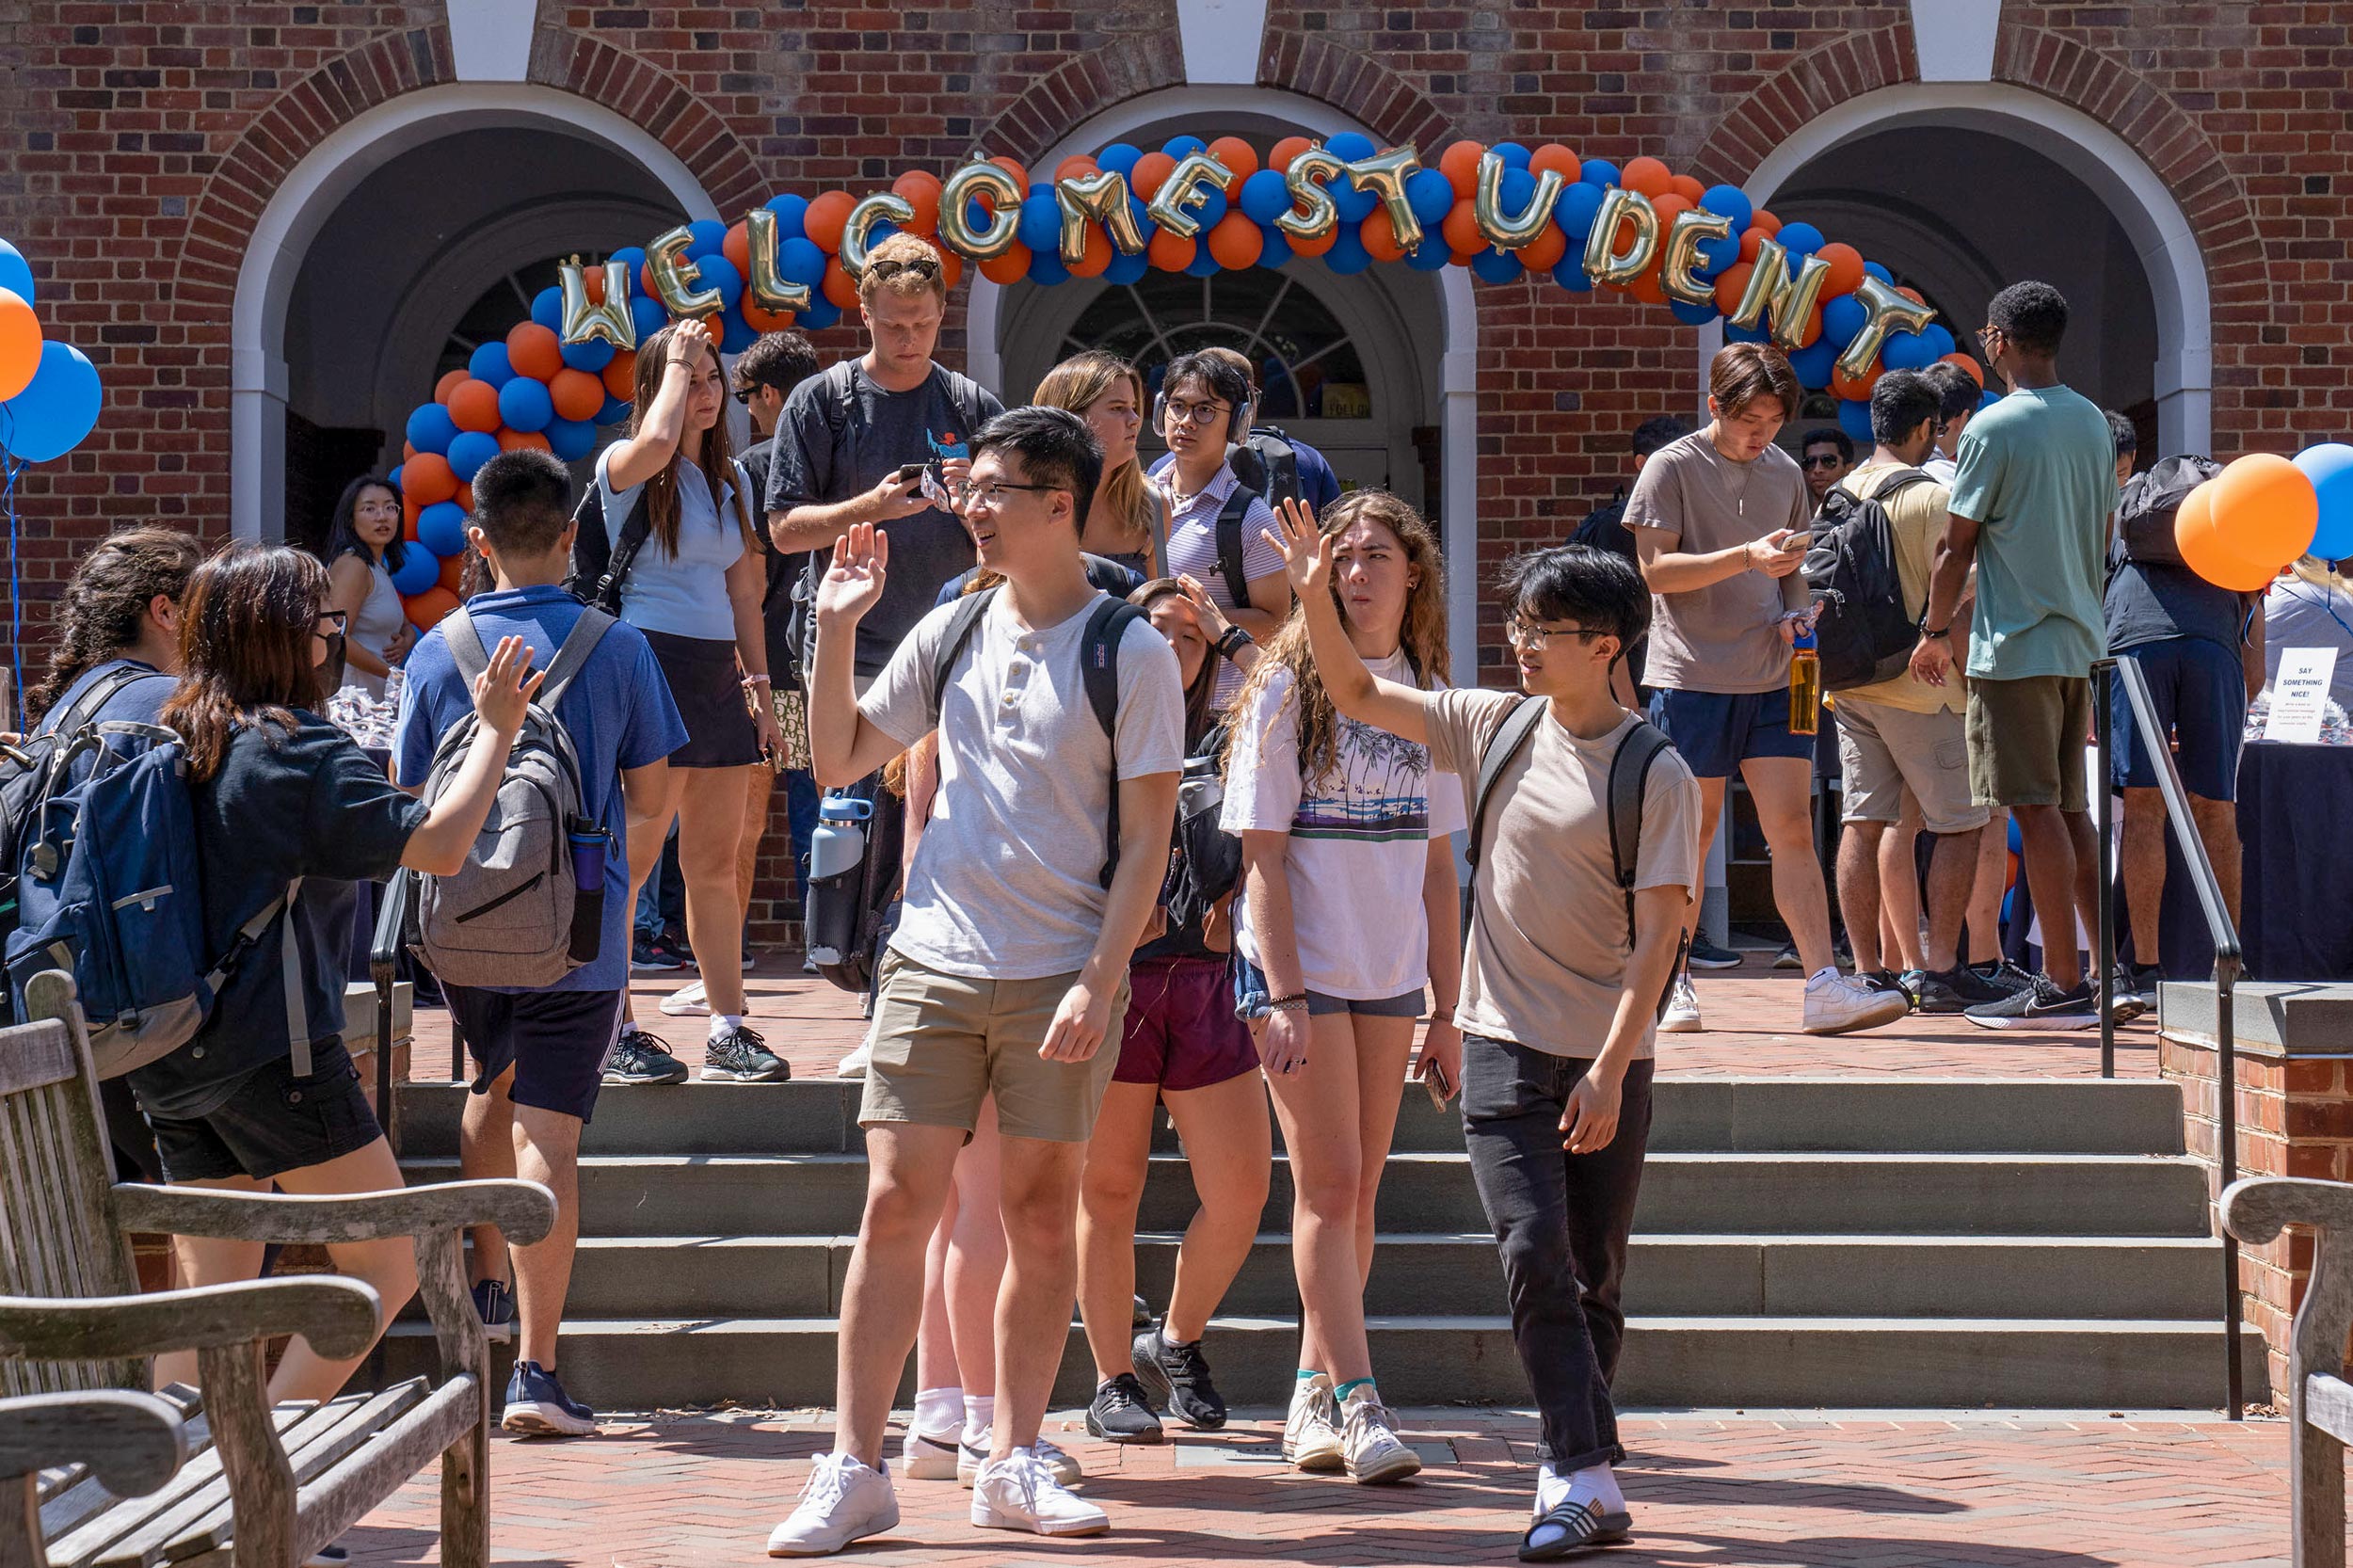 Students pass each other and wave under an orange and blue ballon arch with silver balloon letters spelling out Welcome Students